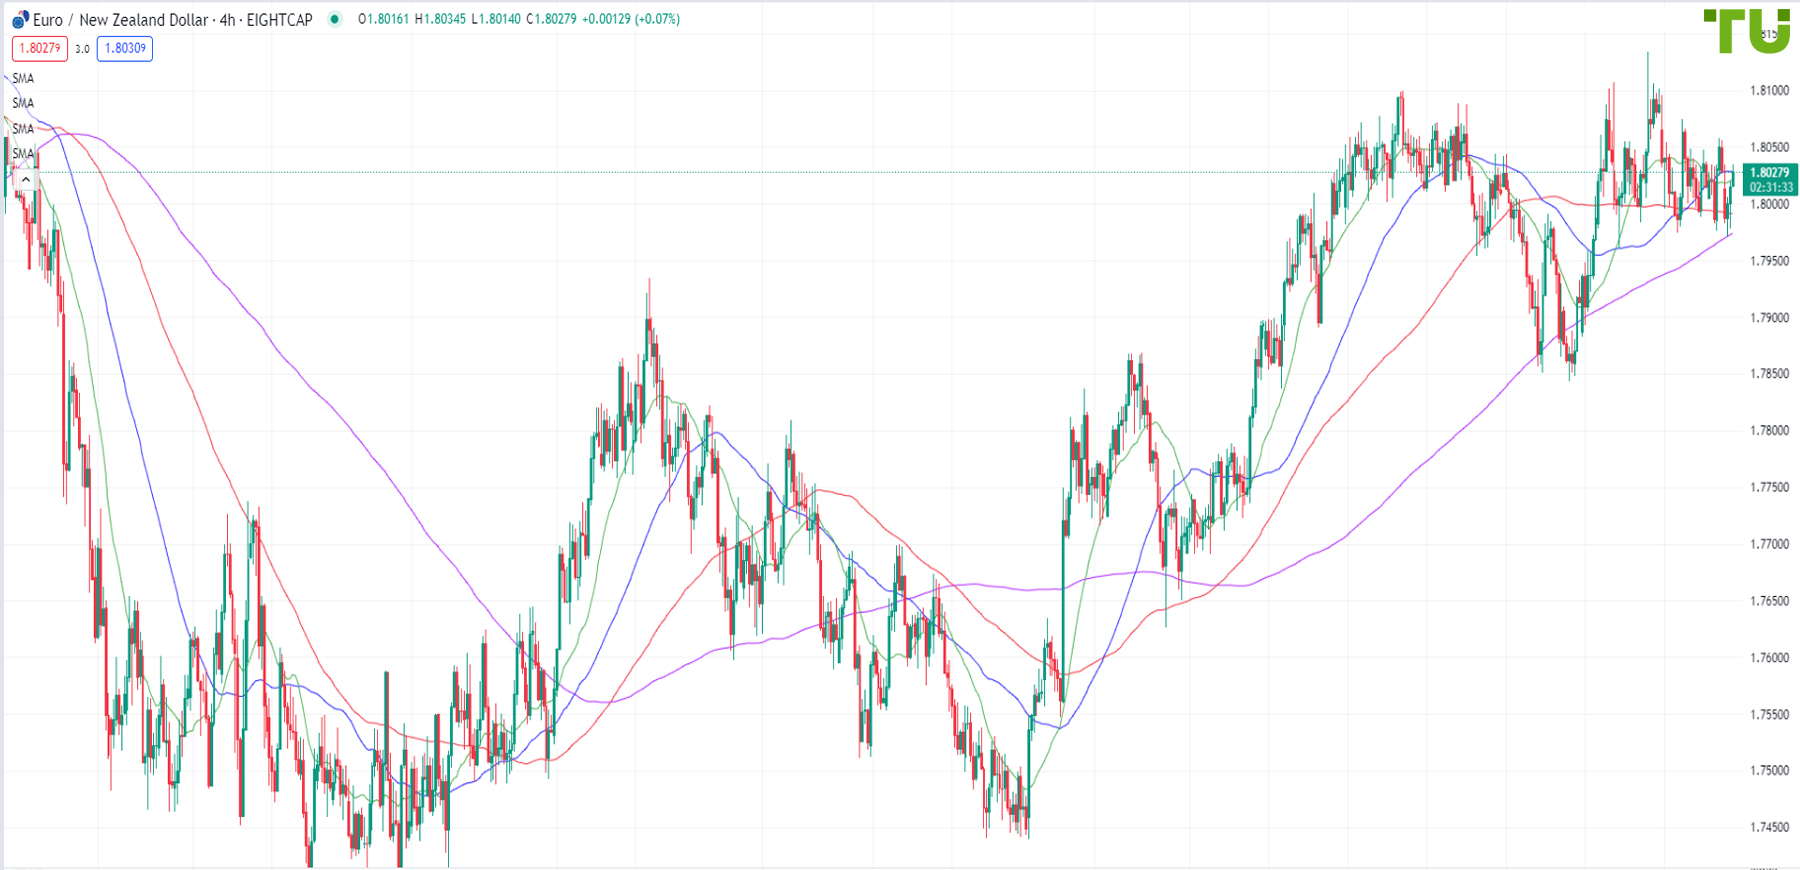 EUR/NZD continue to be bought from 1.7980 support